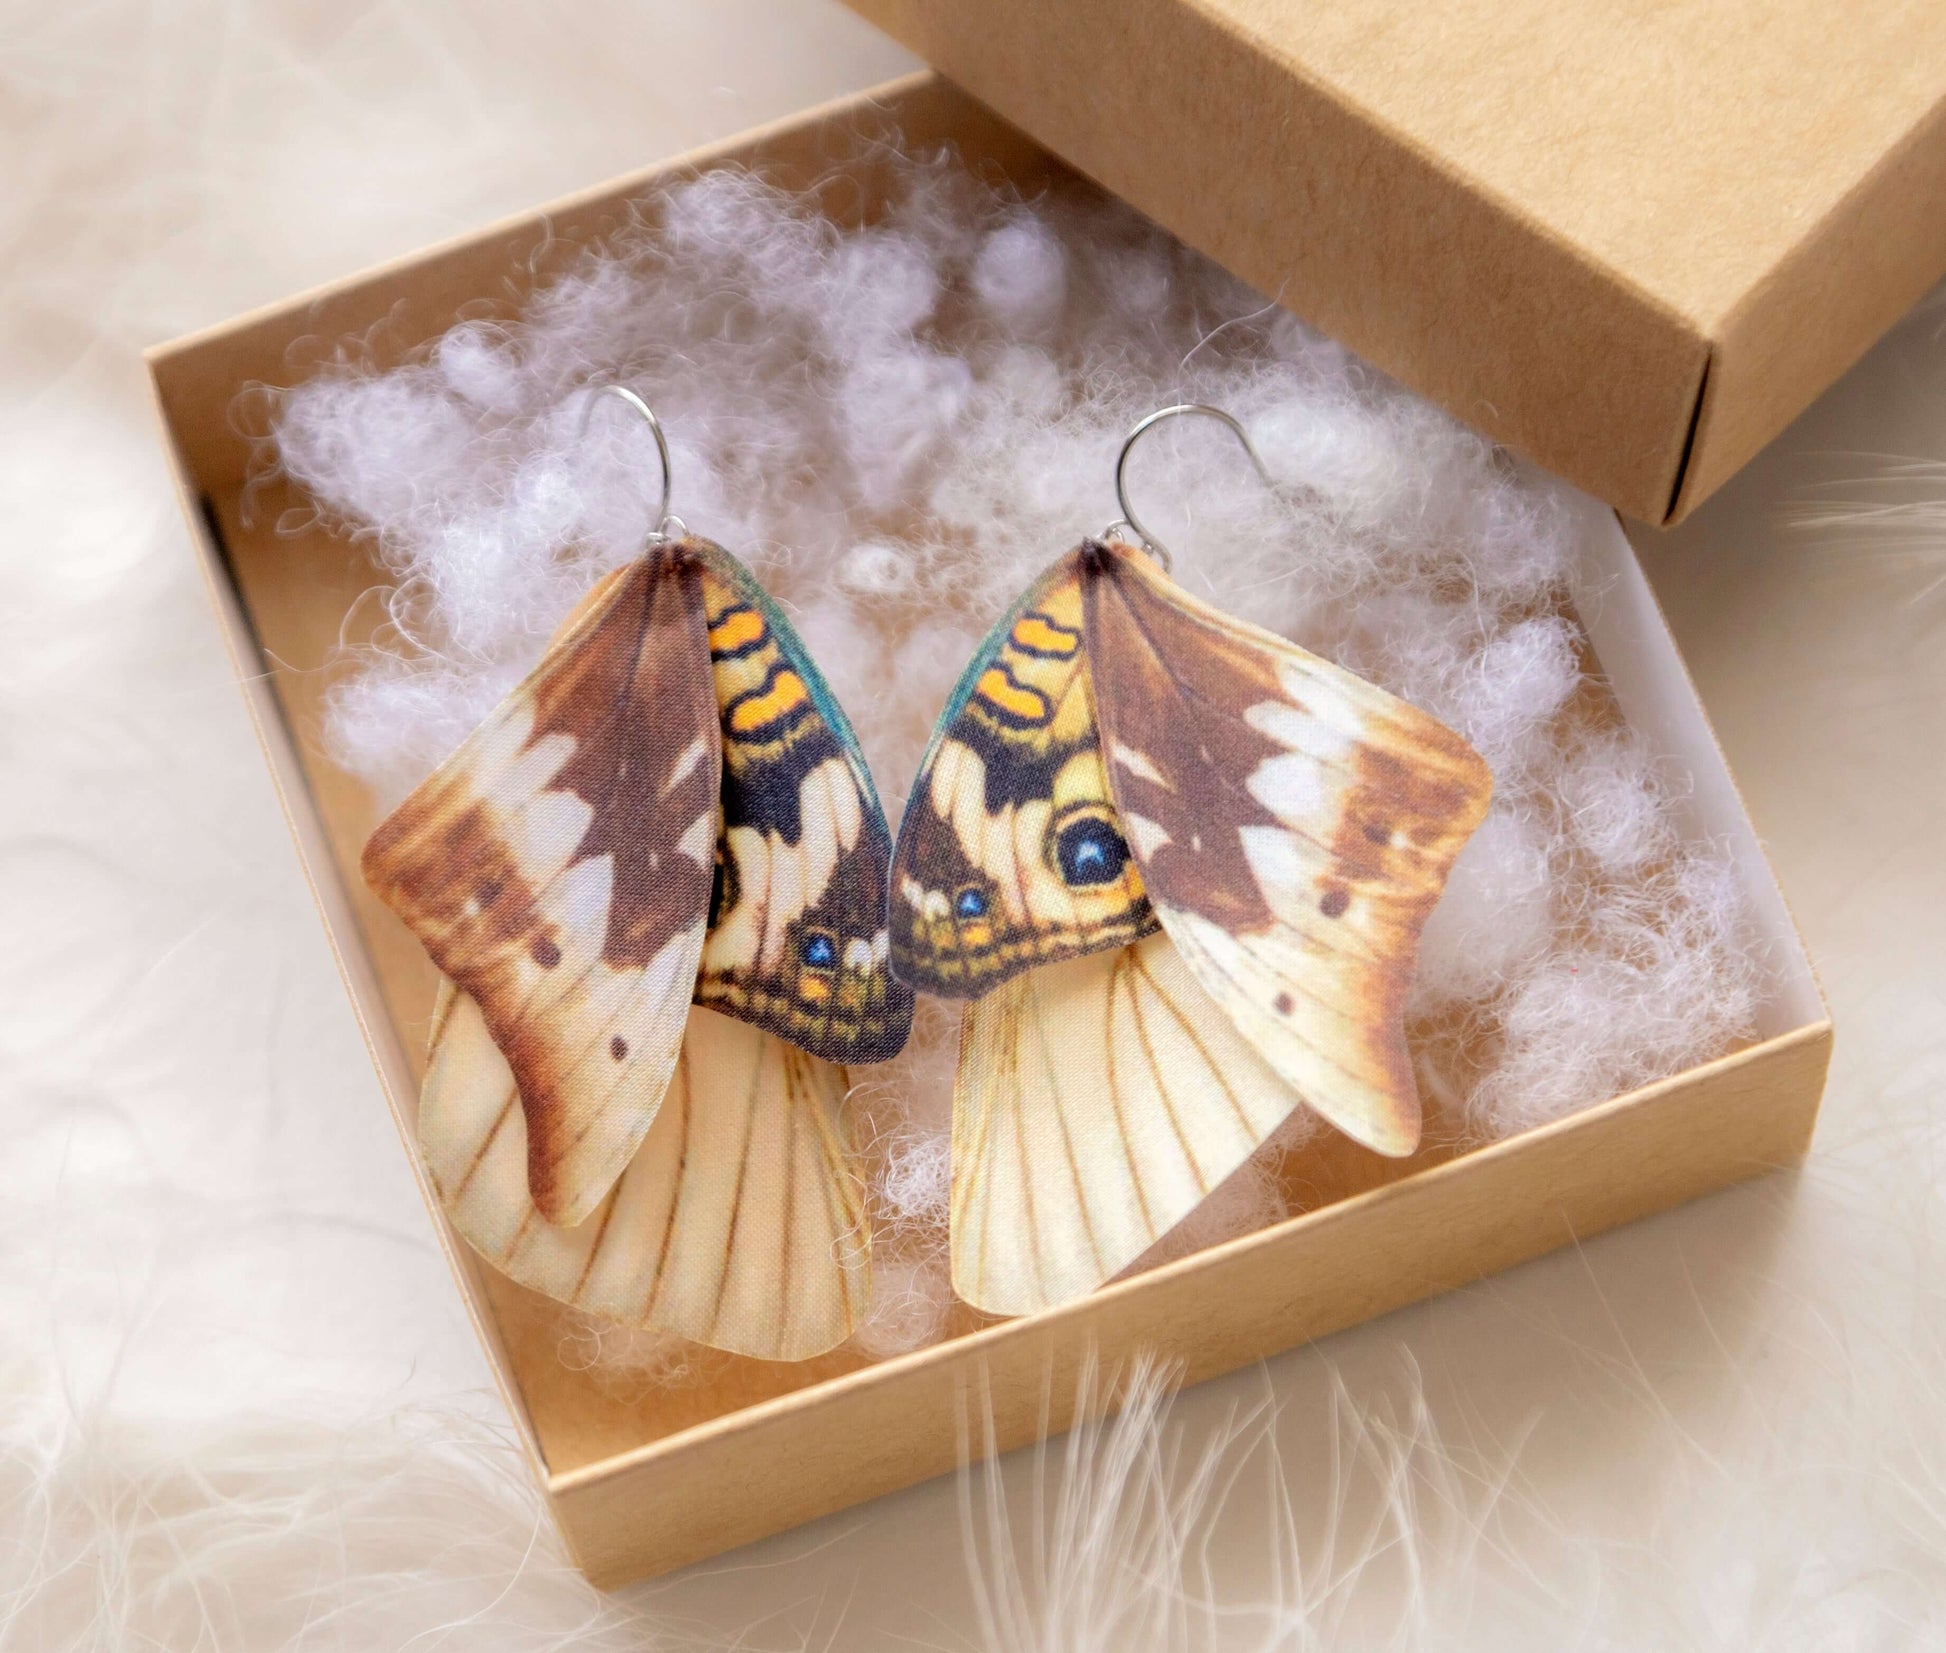 Cool and edgy moth wing earrings